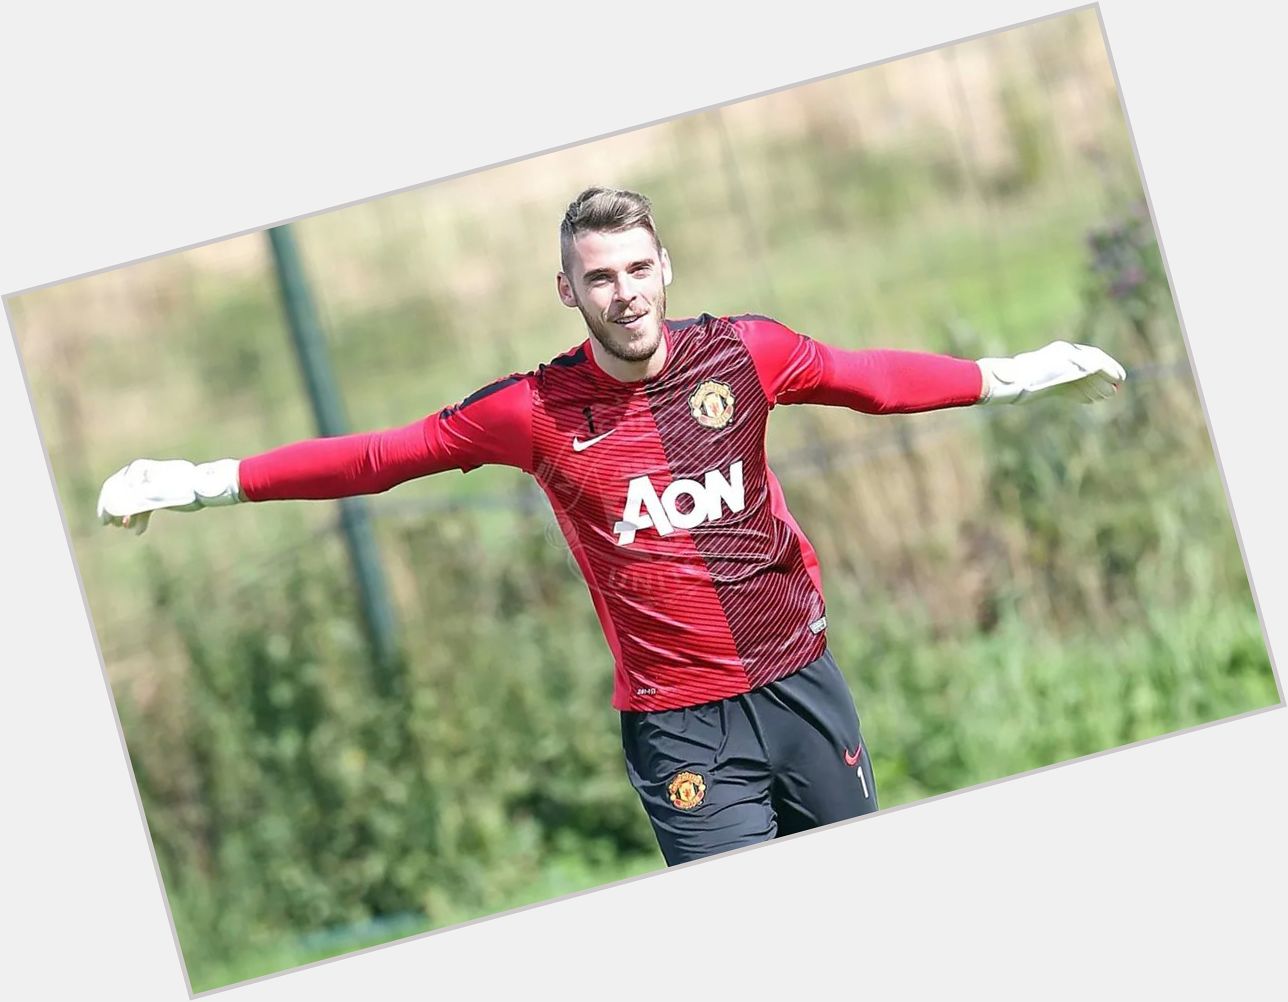 Happy 24th Birthday to the very best there is now. David De Gea GGMU 